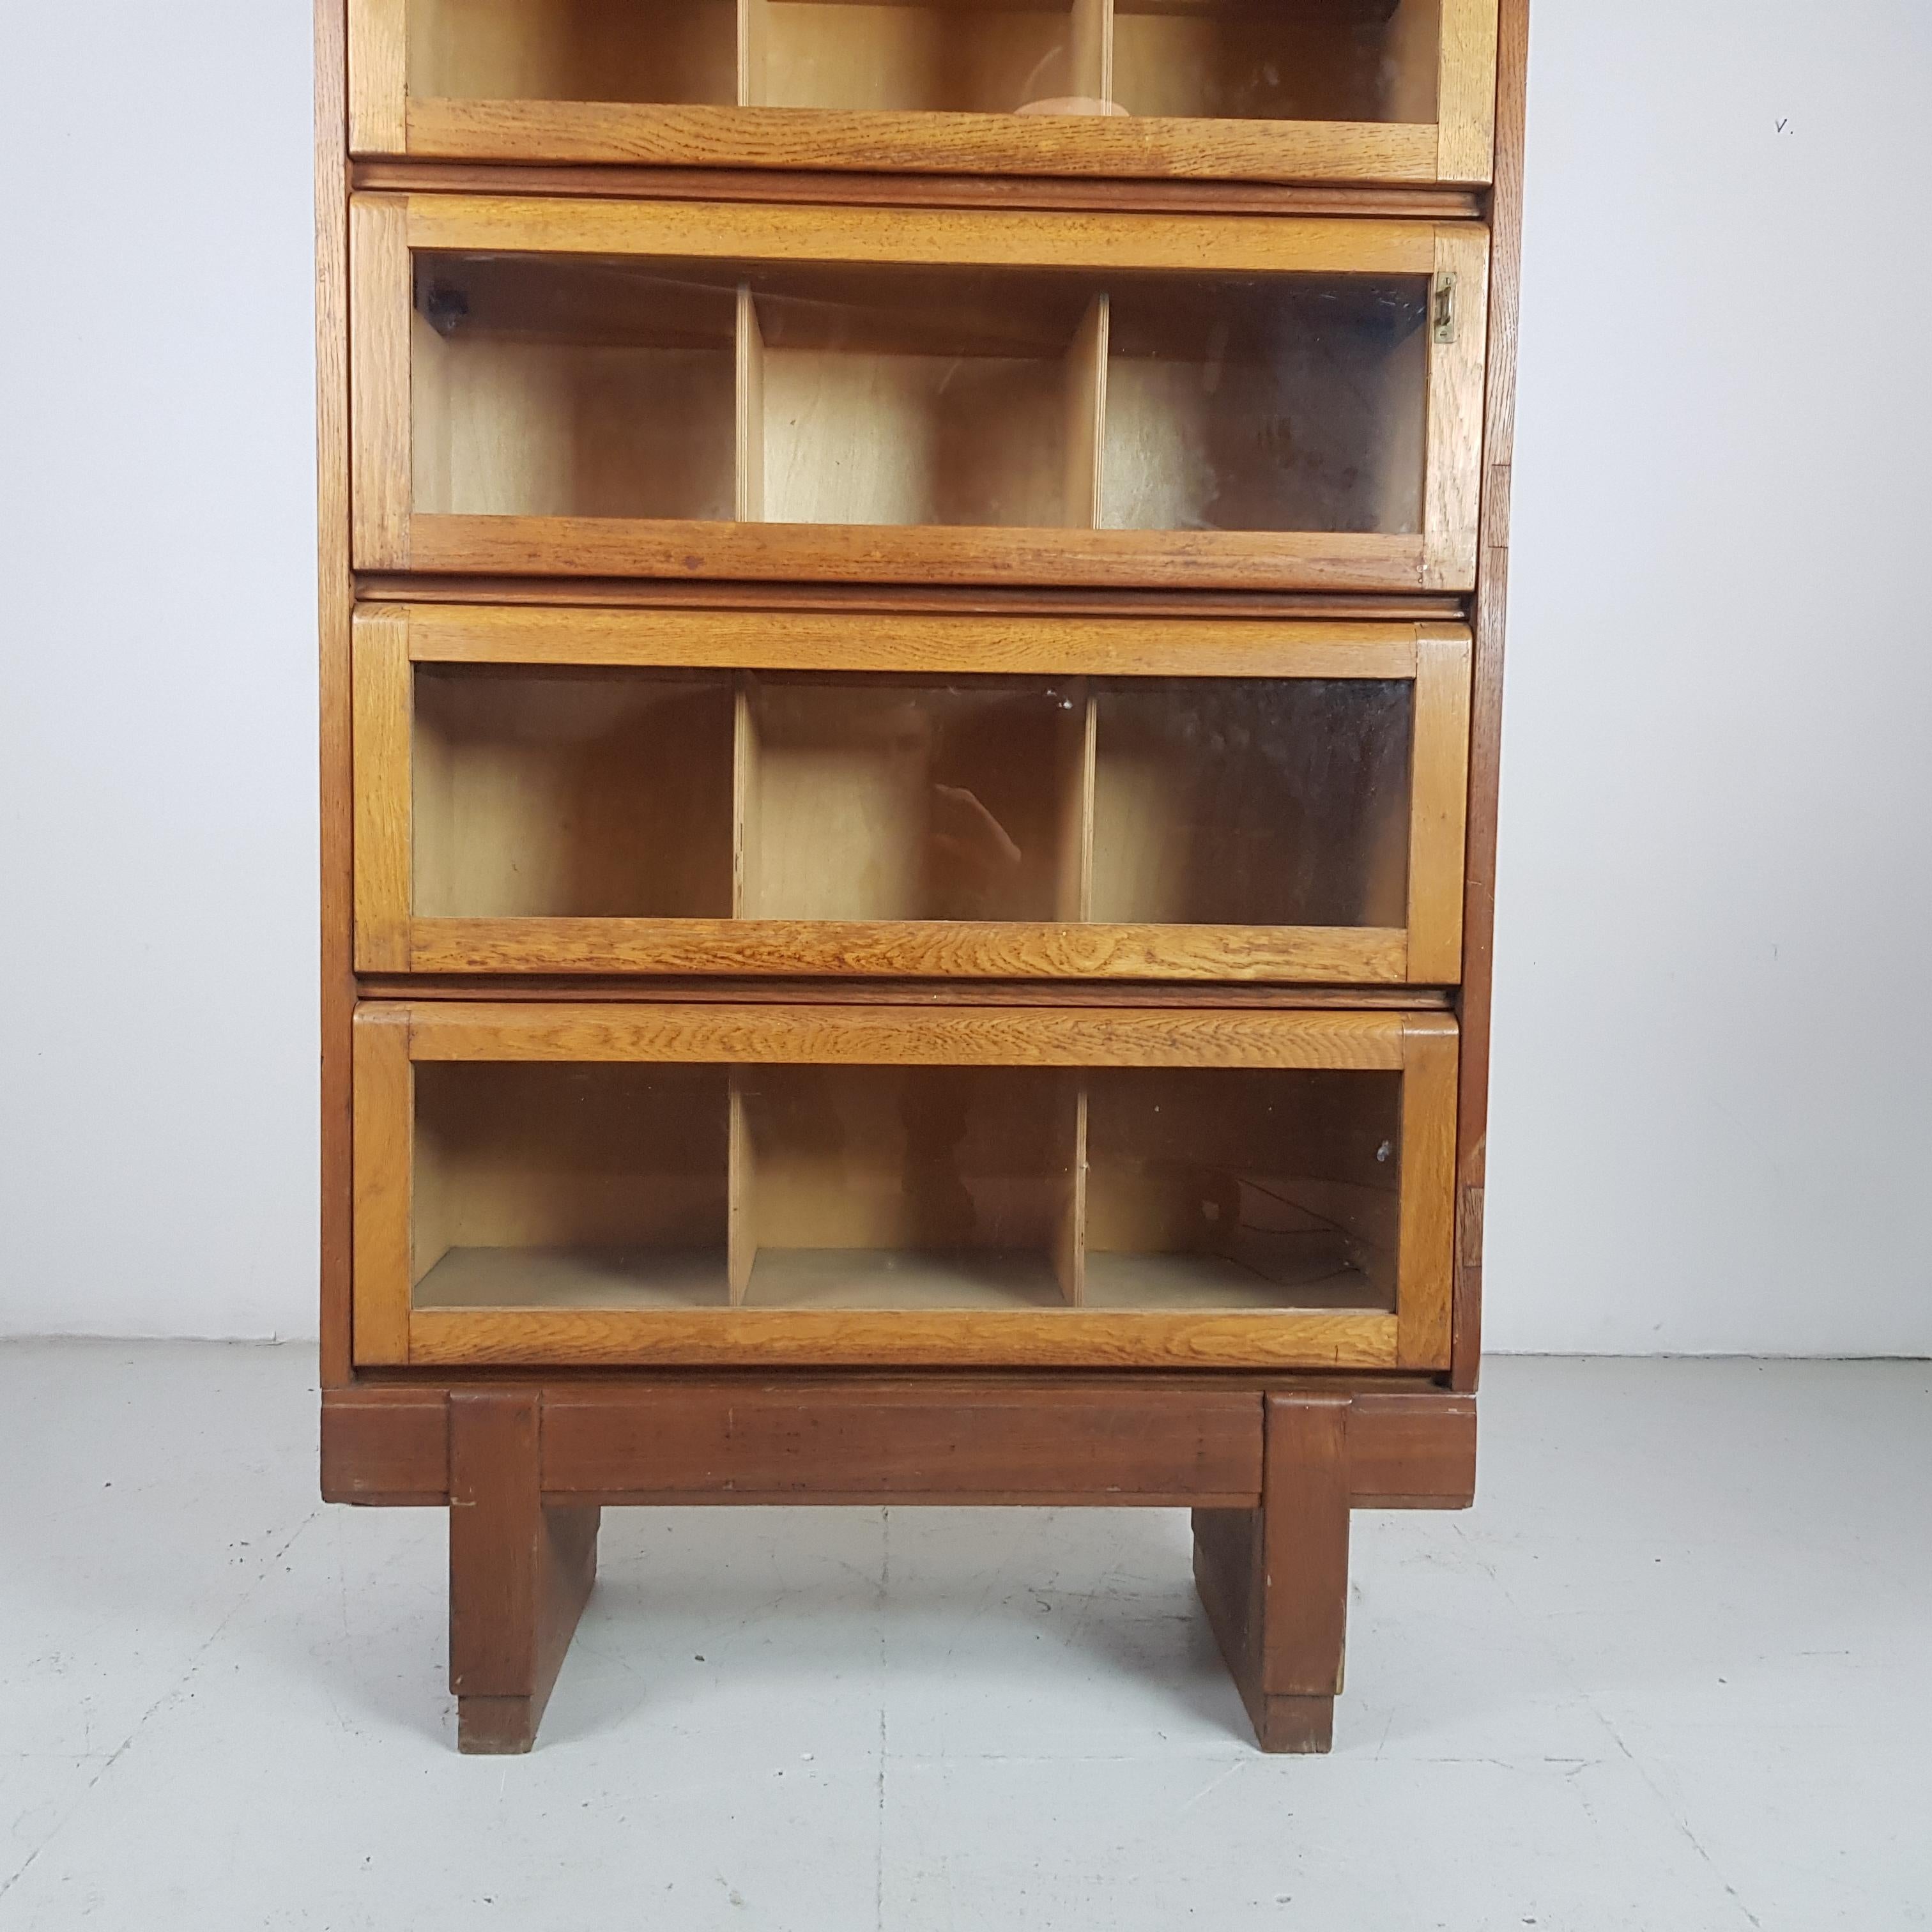 Vintage Midcentury British Staverton Glass Fronted Bookcase Cabinet In Good Condition For Sale In Lewes, East Sussex